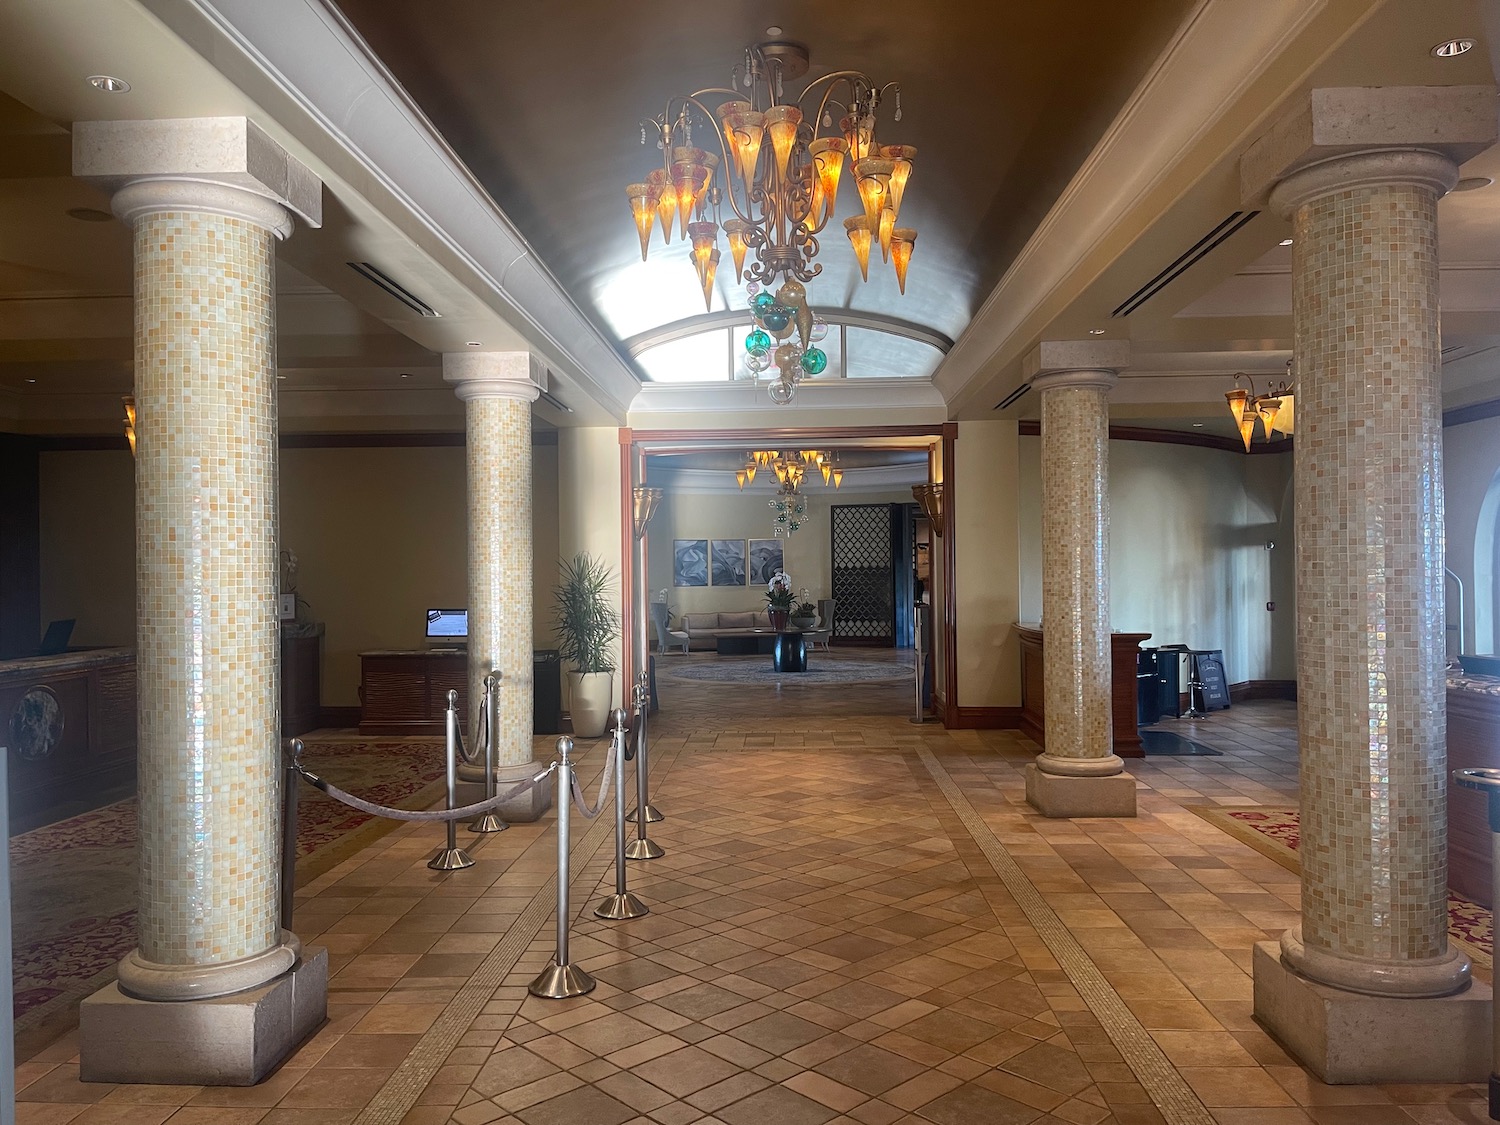 a hallway with columns and chandeliers